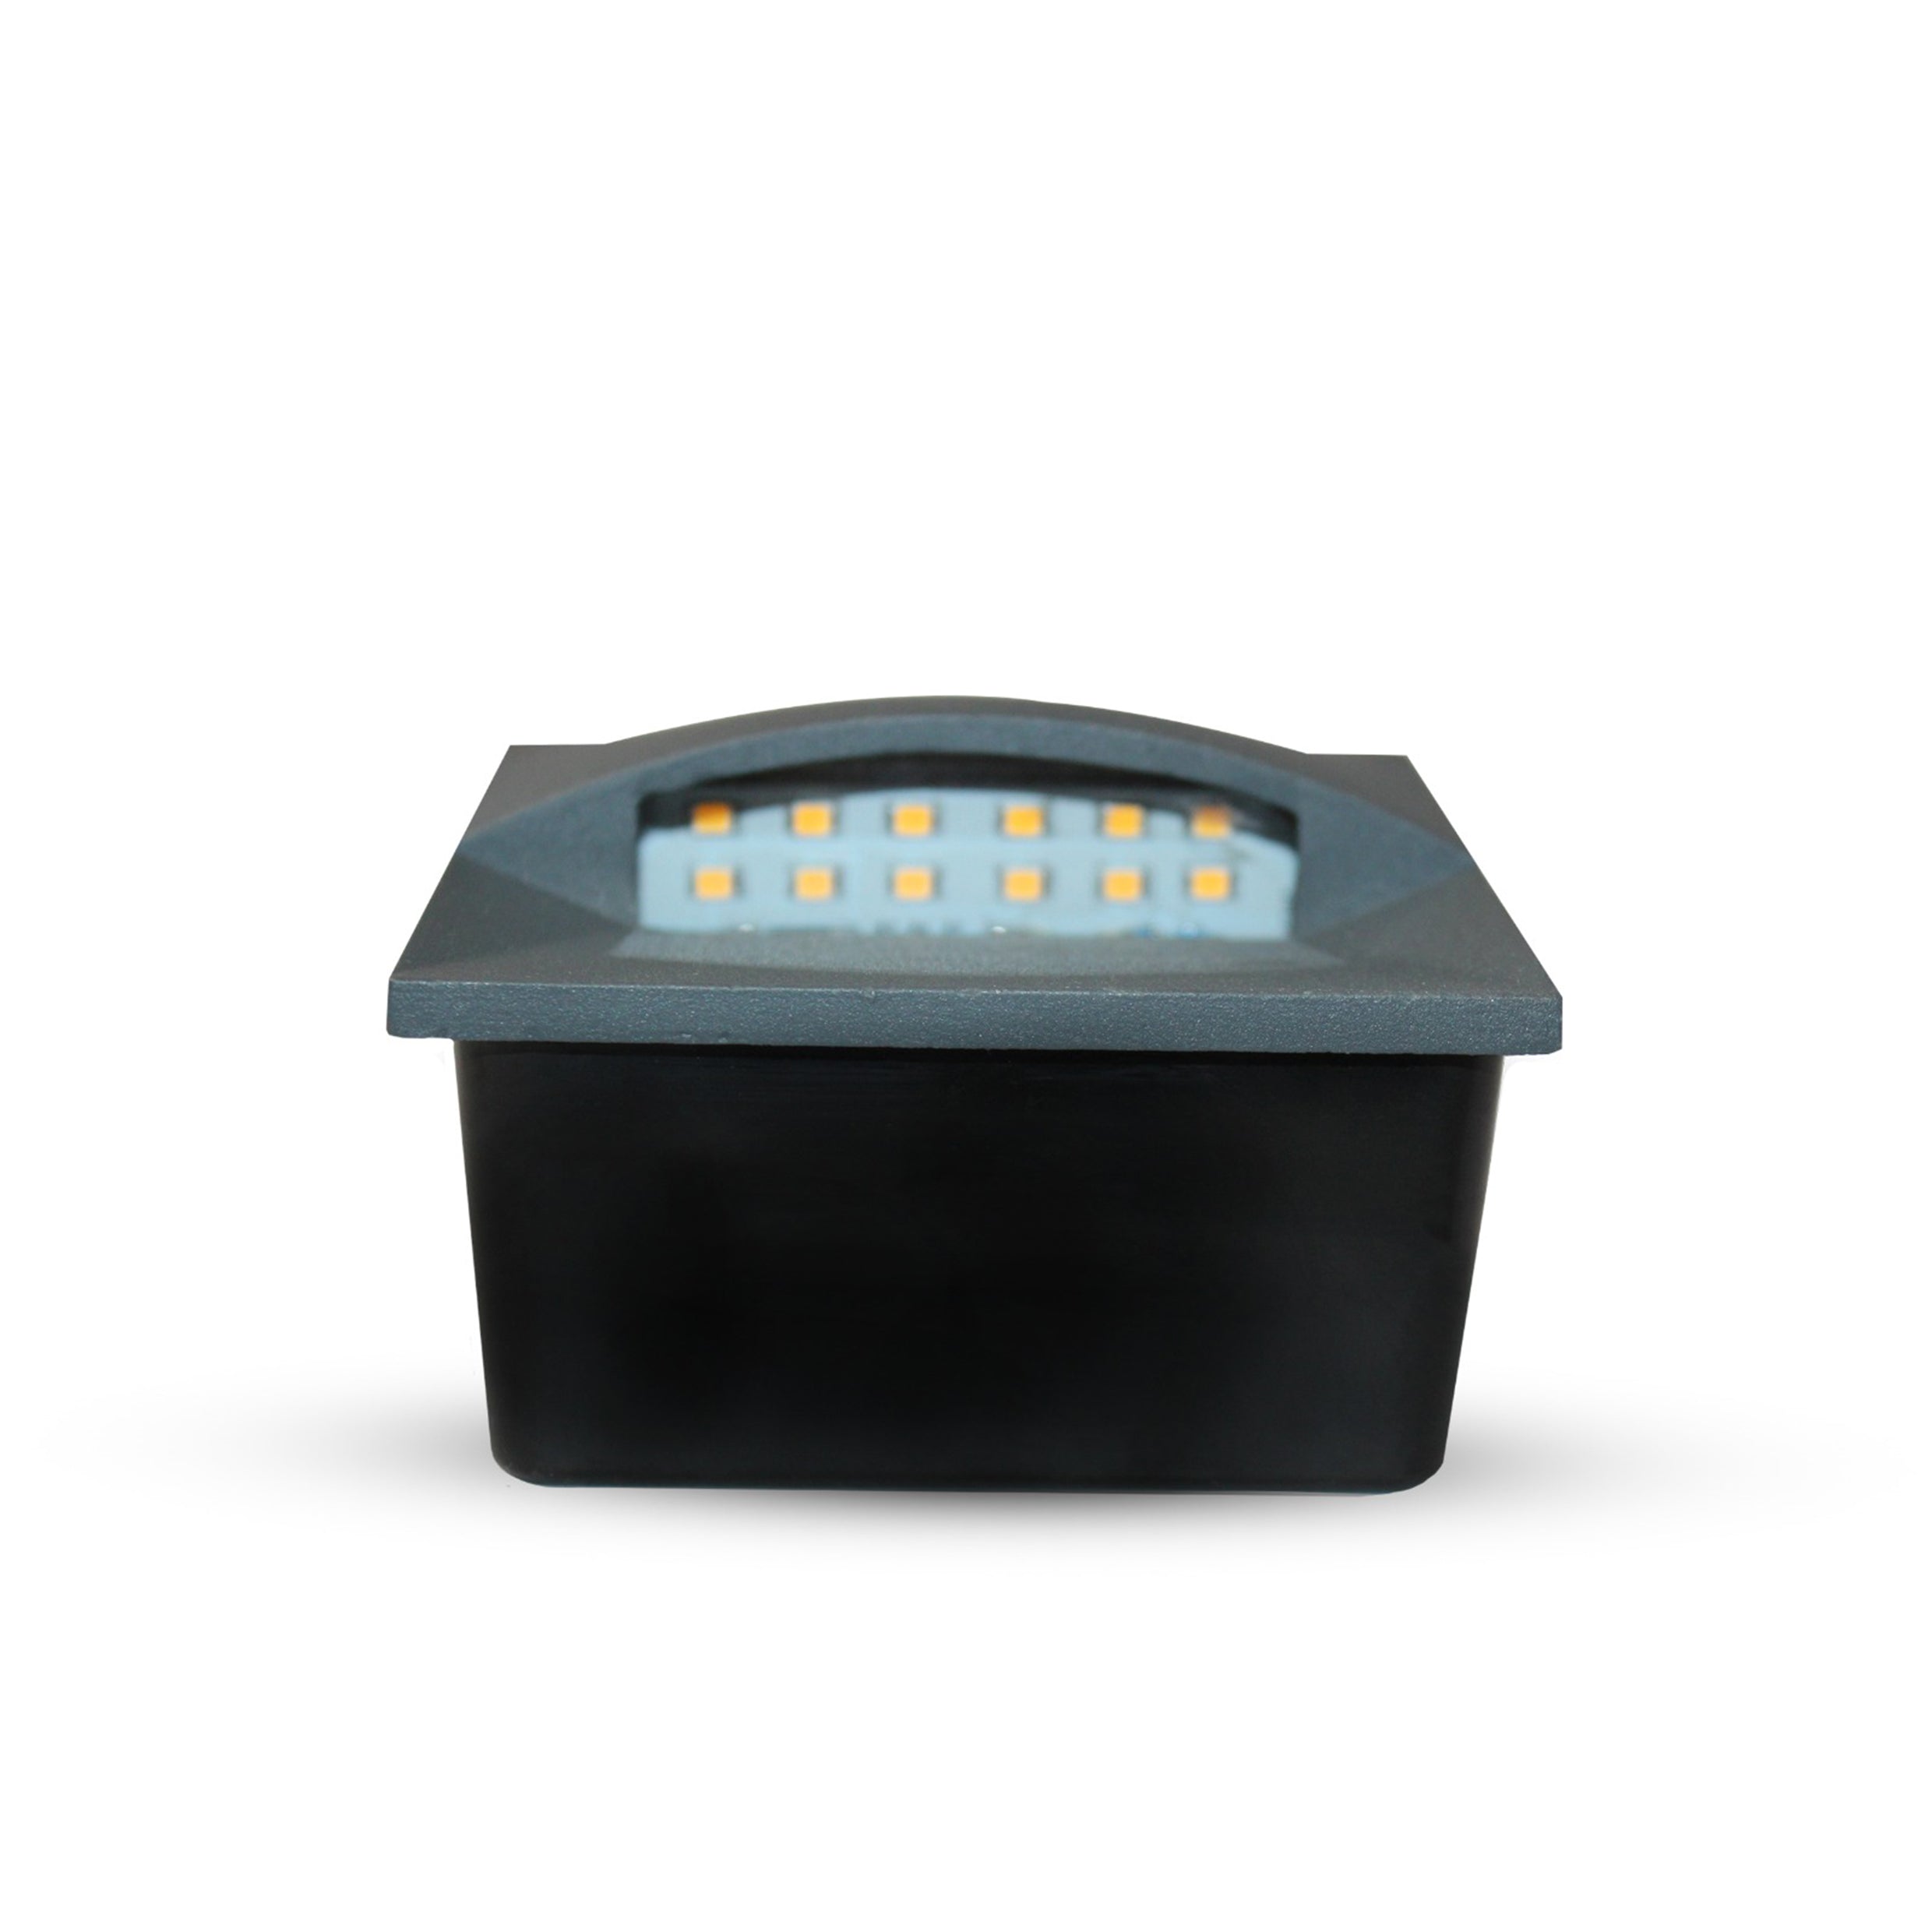 ANKUR SQURVE OUTDOOR RATED LED FOOT LIGHT FOR ROOMS, STAIRCASES OR PATHWAYS